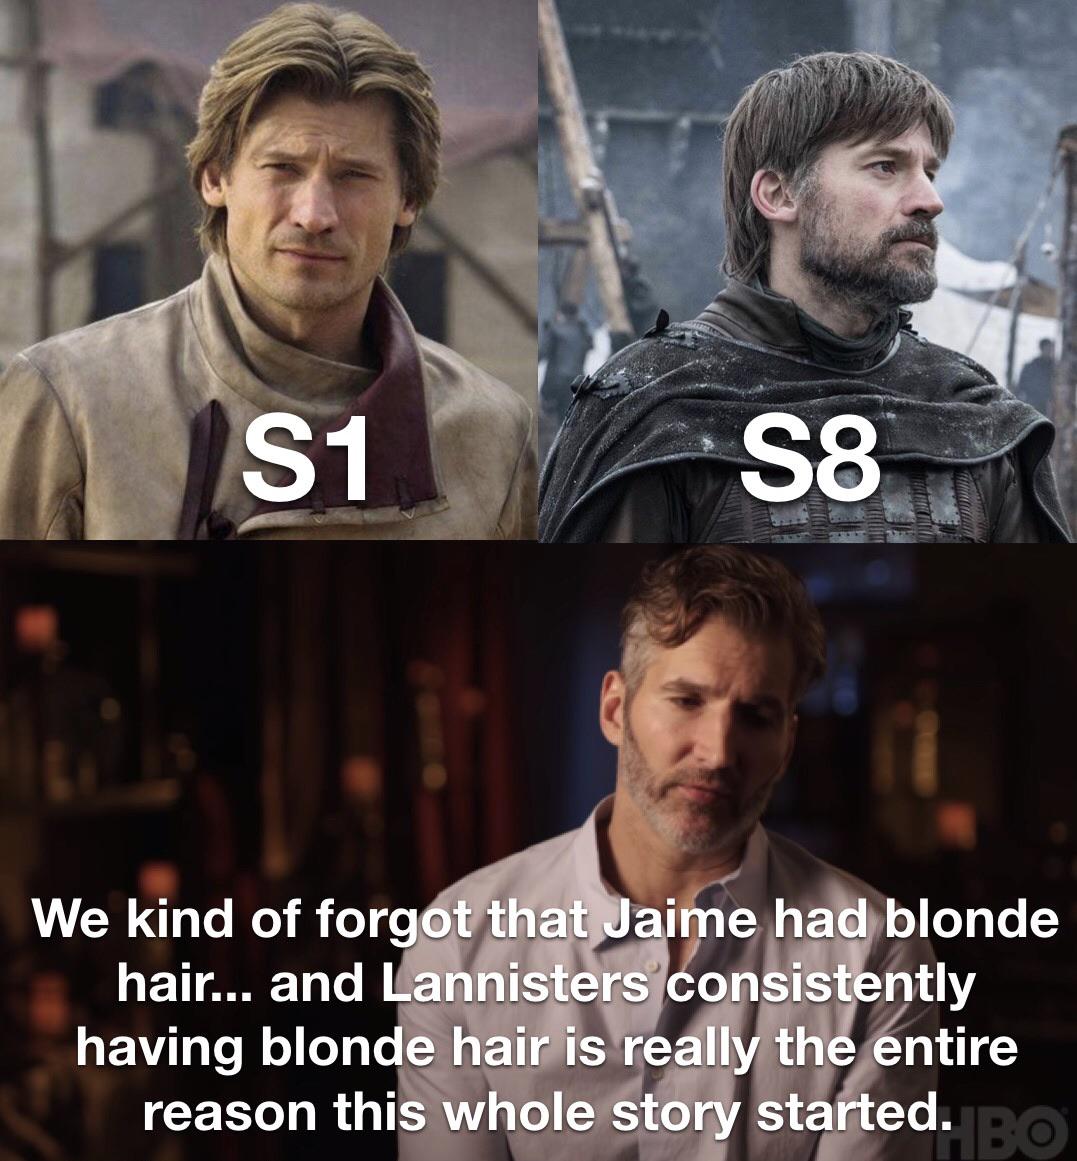 Game of thrones, Lannister, Jaime, Tyrion, Jamie, Lannisters Game of thrones memes Game of thrones, Lannister, Jaime, Tyrion, Jamie, Lannisters text: We kind of forg t that i e had blonde having blonqe hair is regil'/thi,gntire reason this whole story started. 